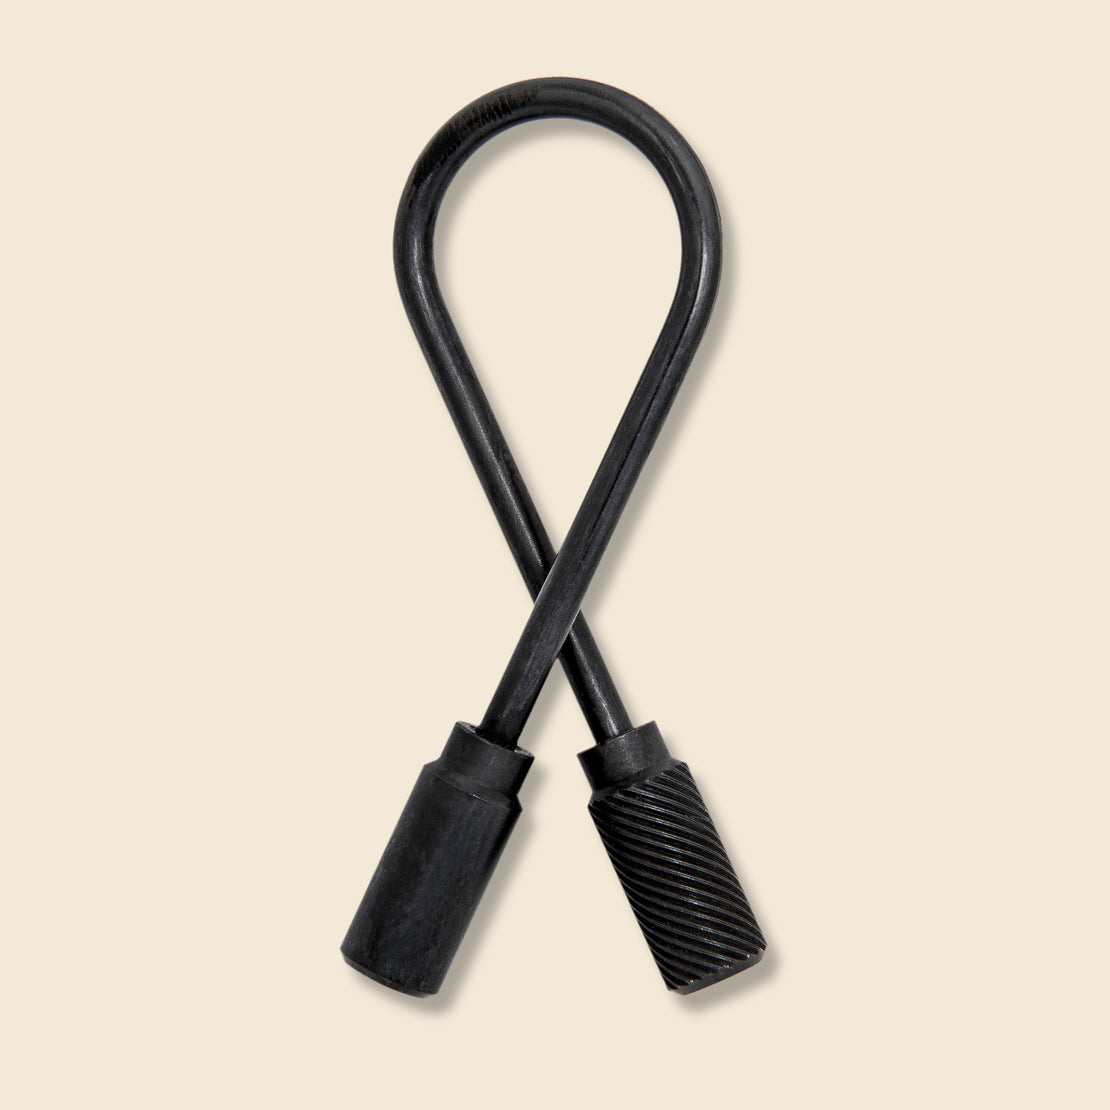 Craighill Closed Helix Keychain - Carbon